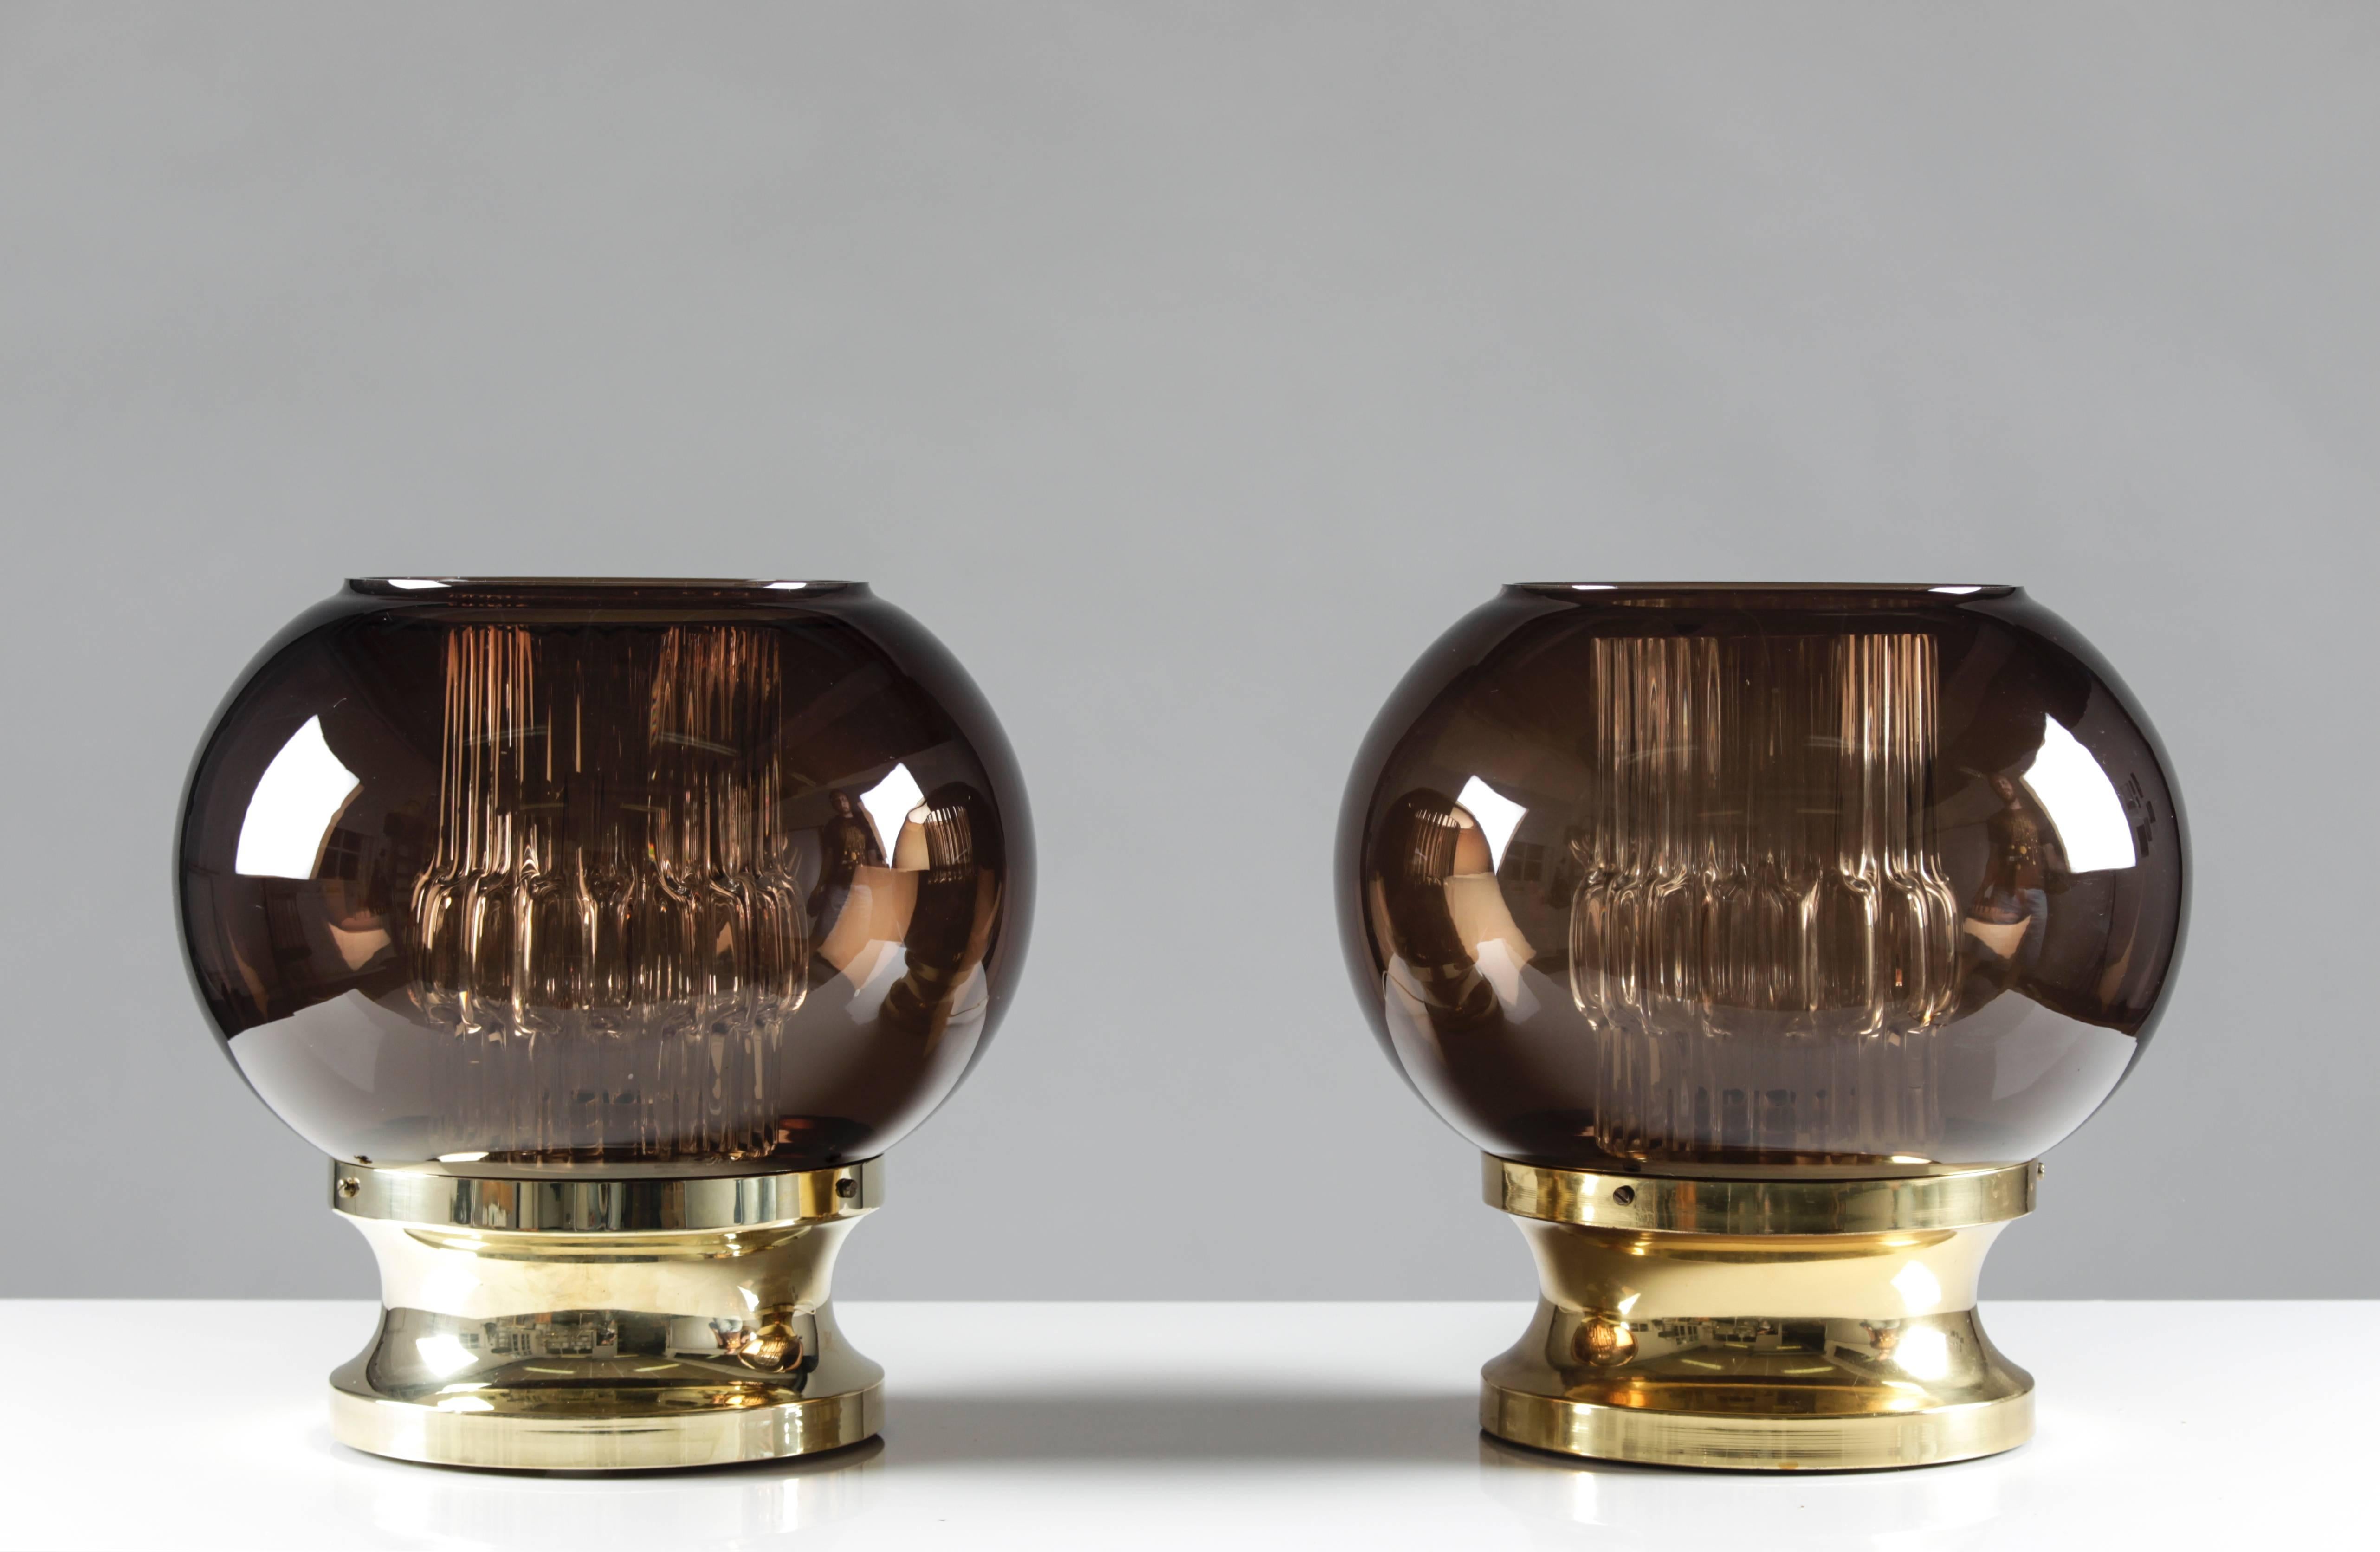 A pair of table lamps made by Carl Fagerlund for Orrefors. The lamps feature a brass base, holding two glass shades; one cylinder-shaped in clear glass and a bigger globe in brown/violet glass. There is an ever so slight nuance in color in the brass